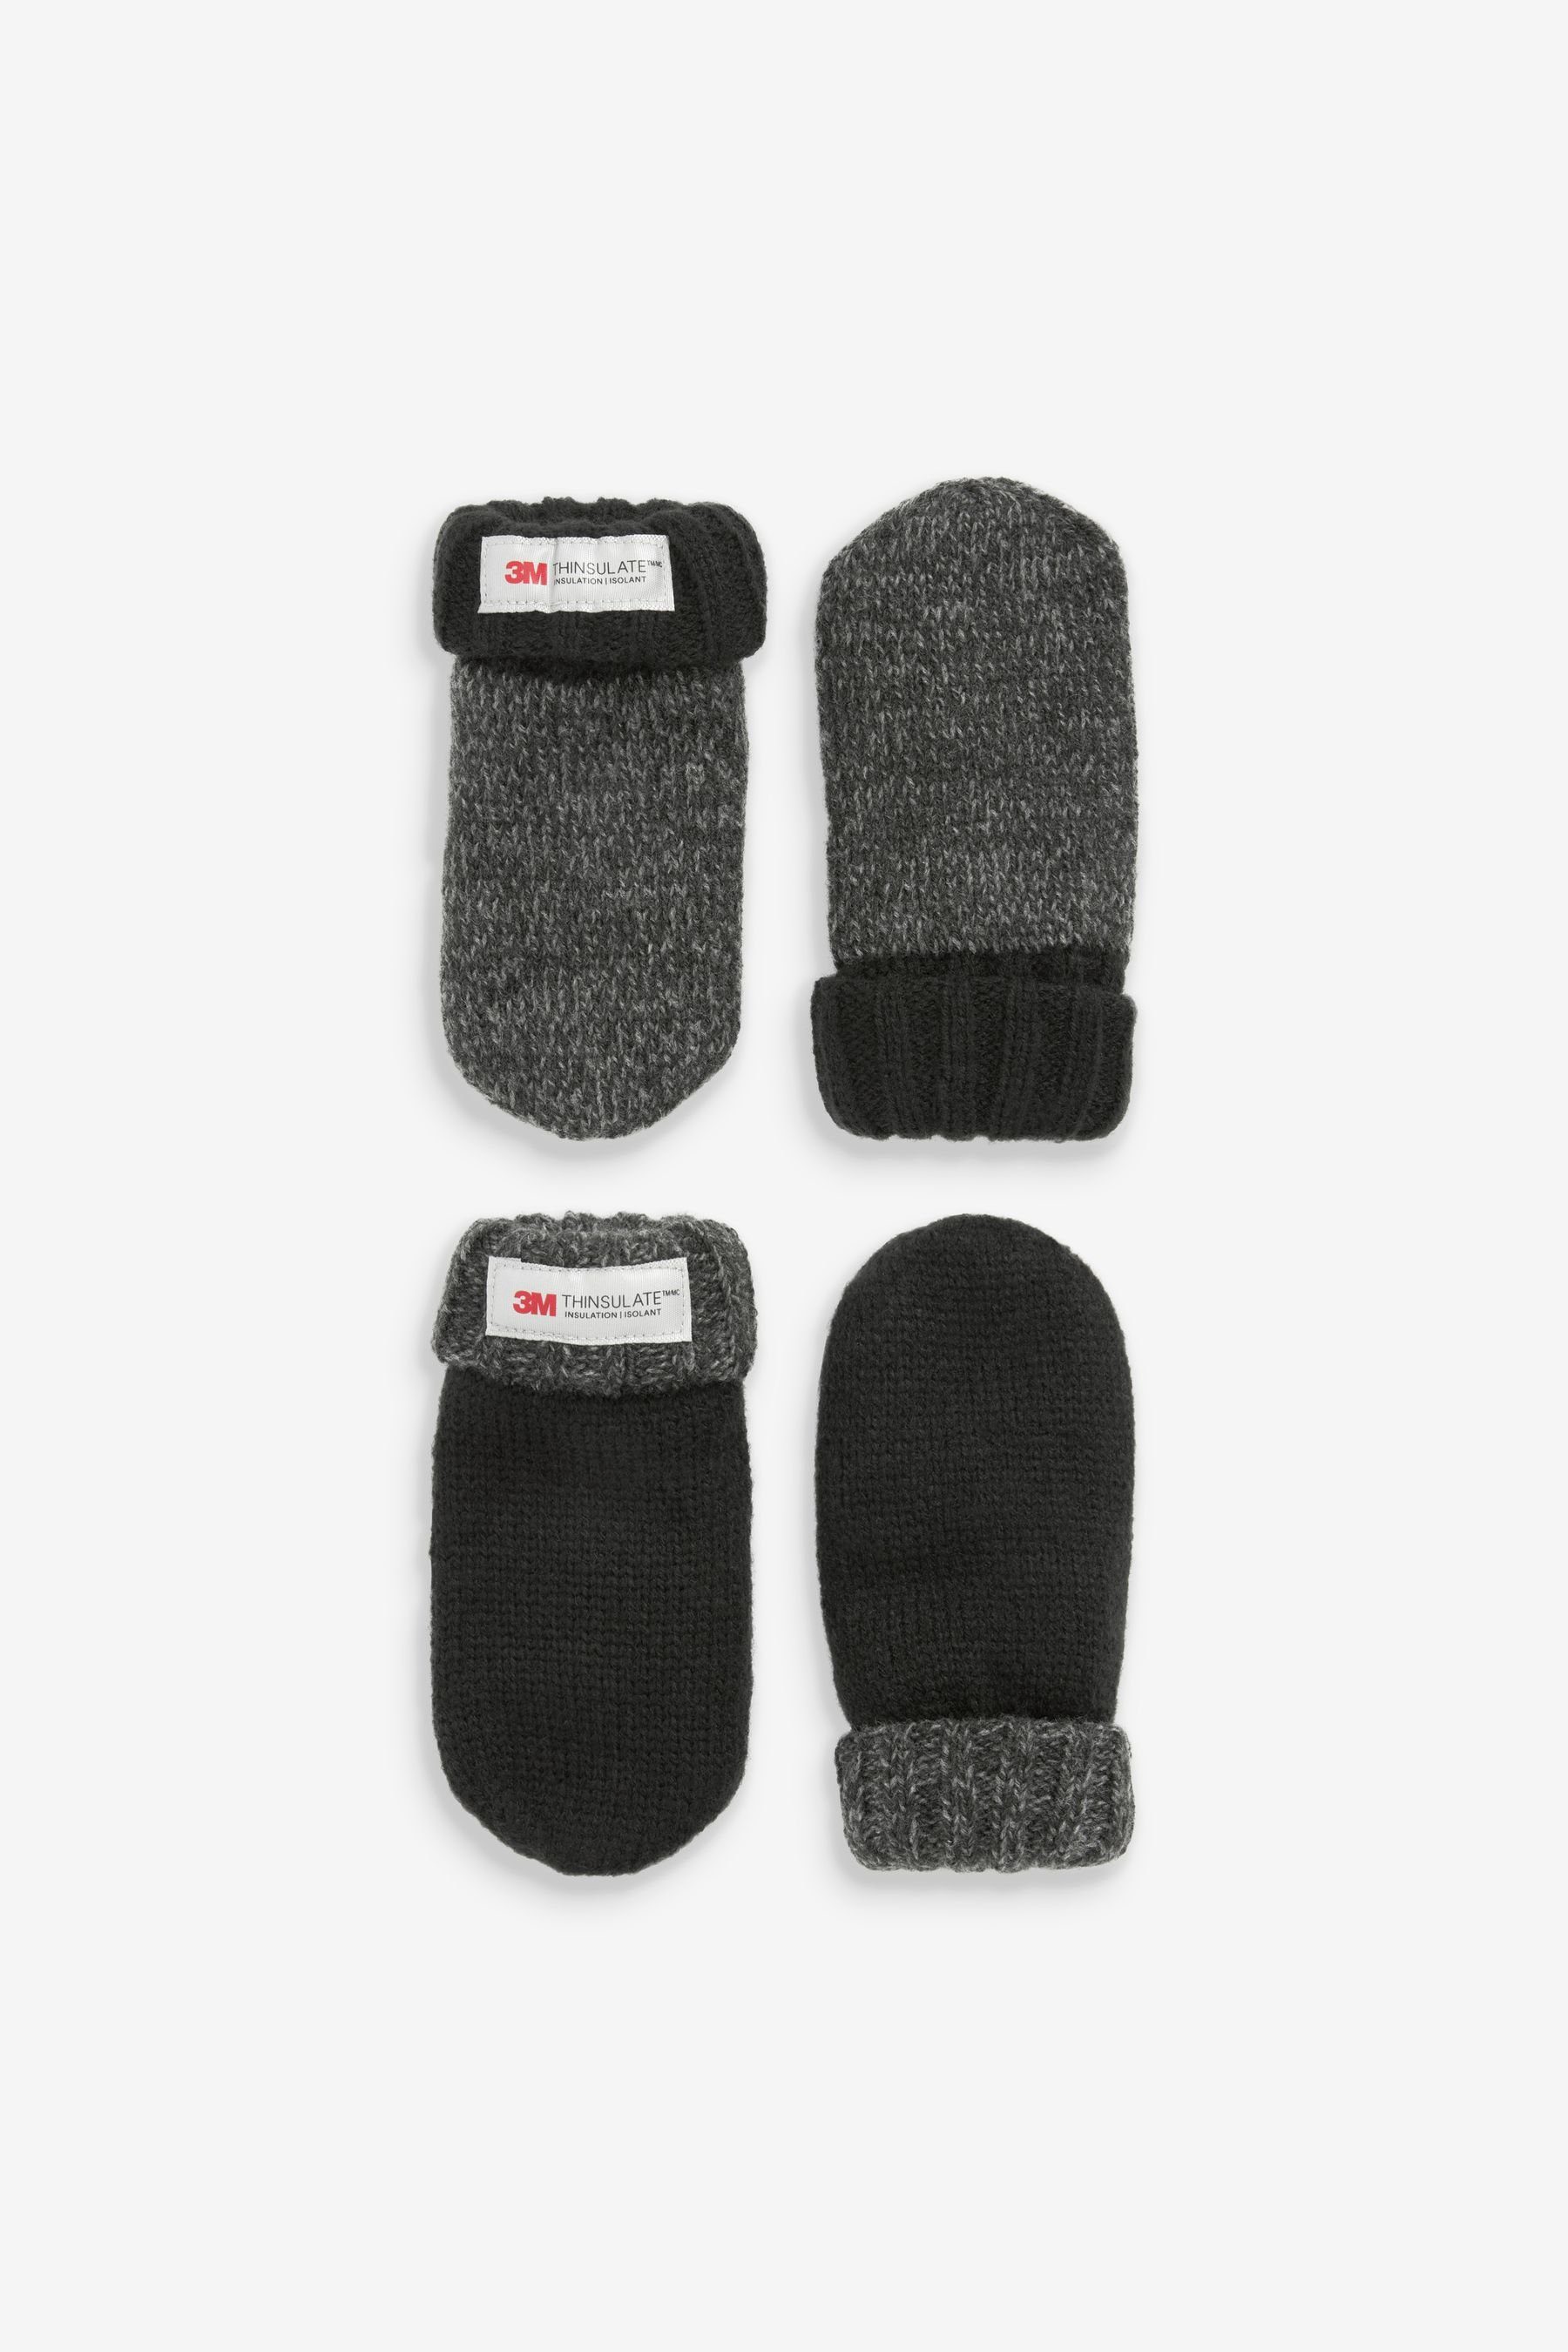 Next Fäustlinge Thinsulate™ Fausthandschuhe, 2er-Pack Charcoal Grey